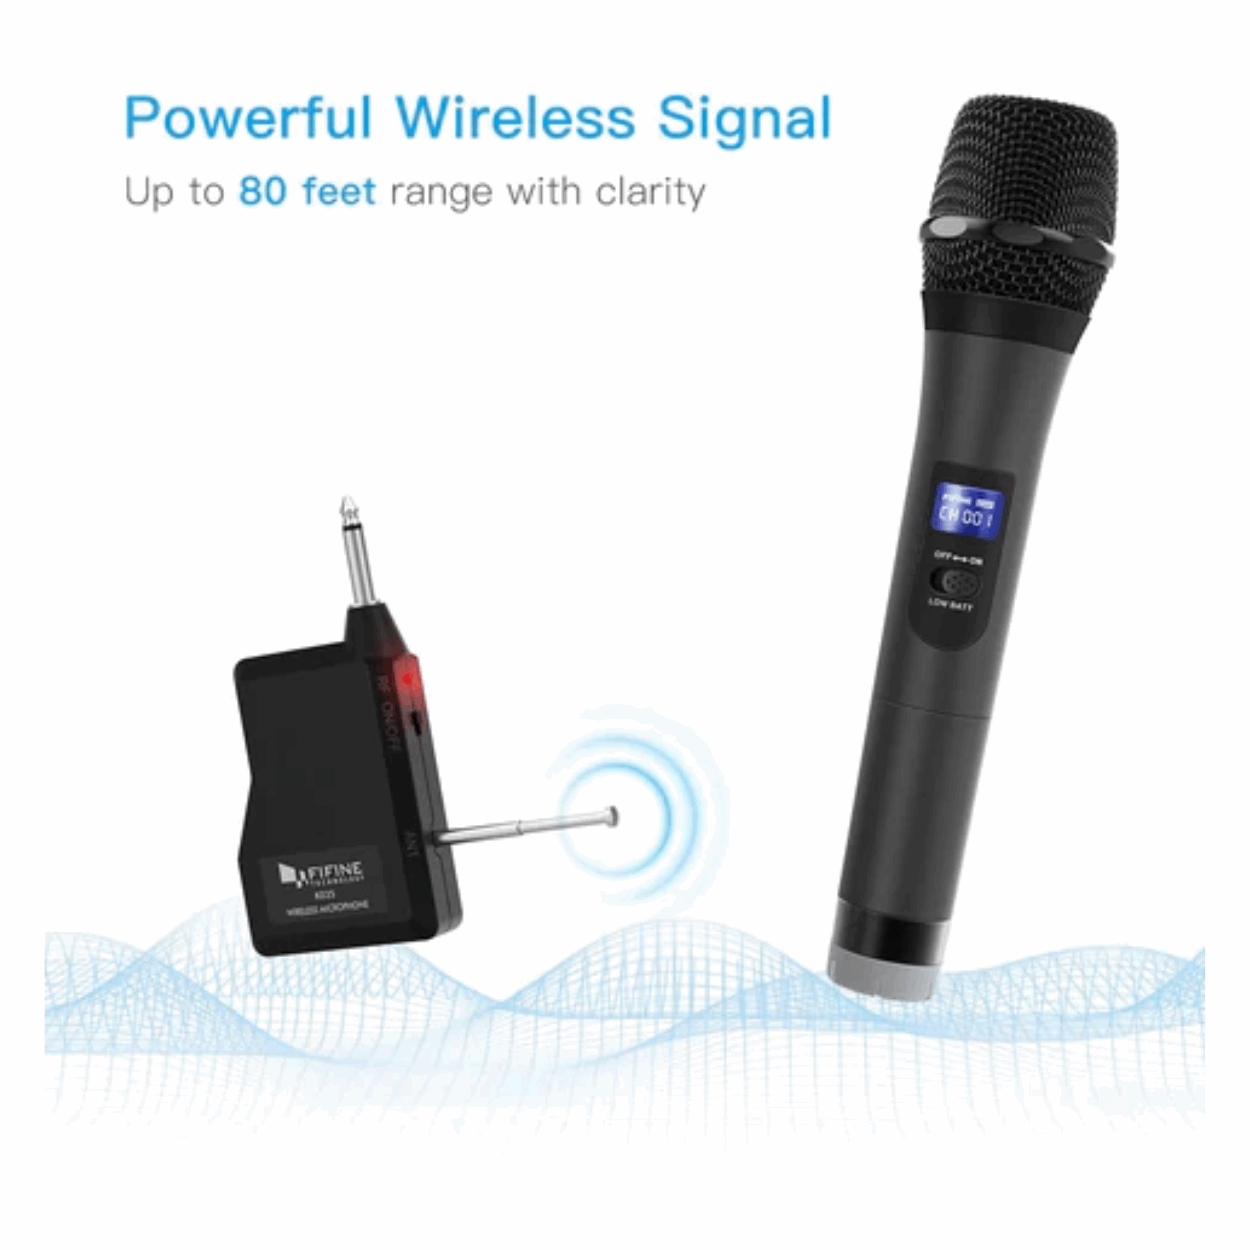 FIFINE K025 Wireless Microphone, Vocal Microphone, Fifine Handheld Dynamic Microphone Wireless mic System for Karaoke Nights and House Parties to Have Fun Over The Mixer,PA System,Speakers (K-025)